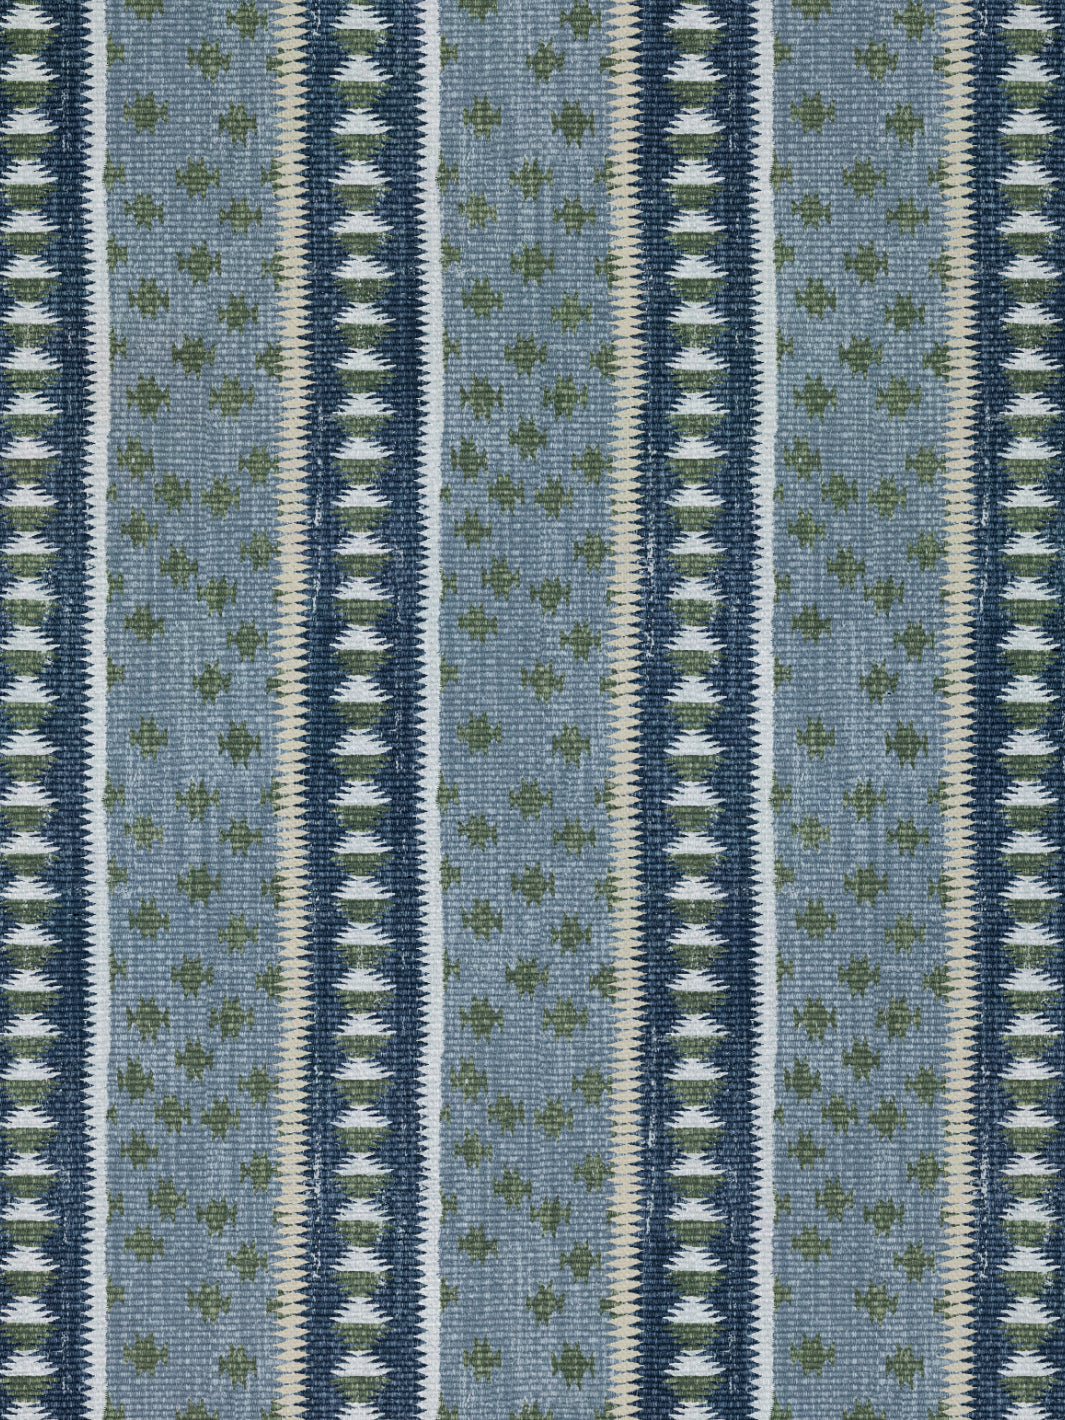 'Northstar Stripe' Linen Fabric by Nathan Turner - Blue Green